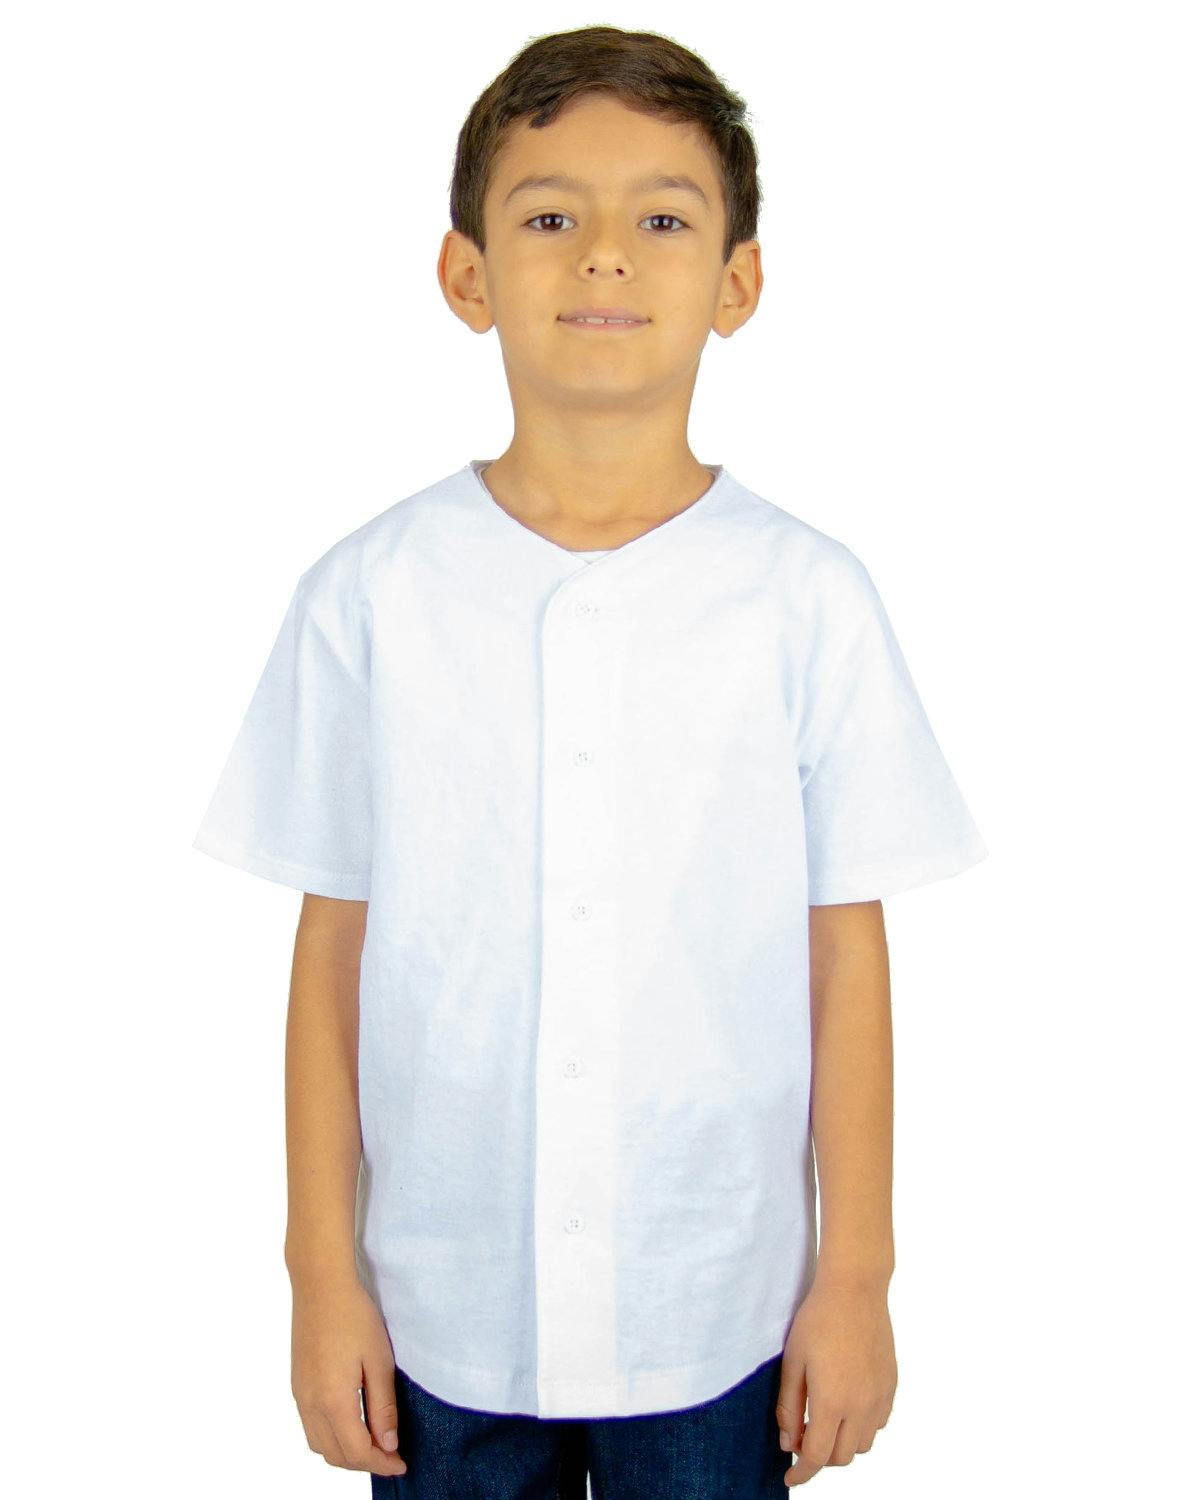 Image for Youth Baseball Jersey